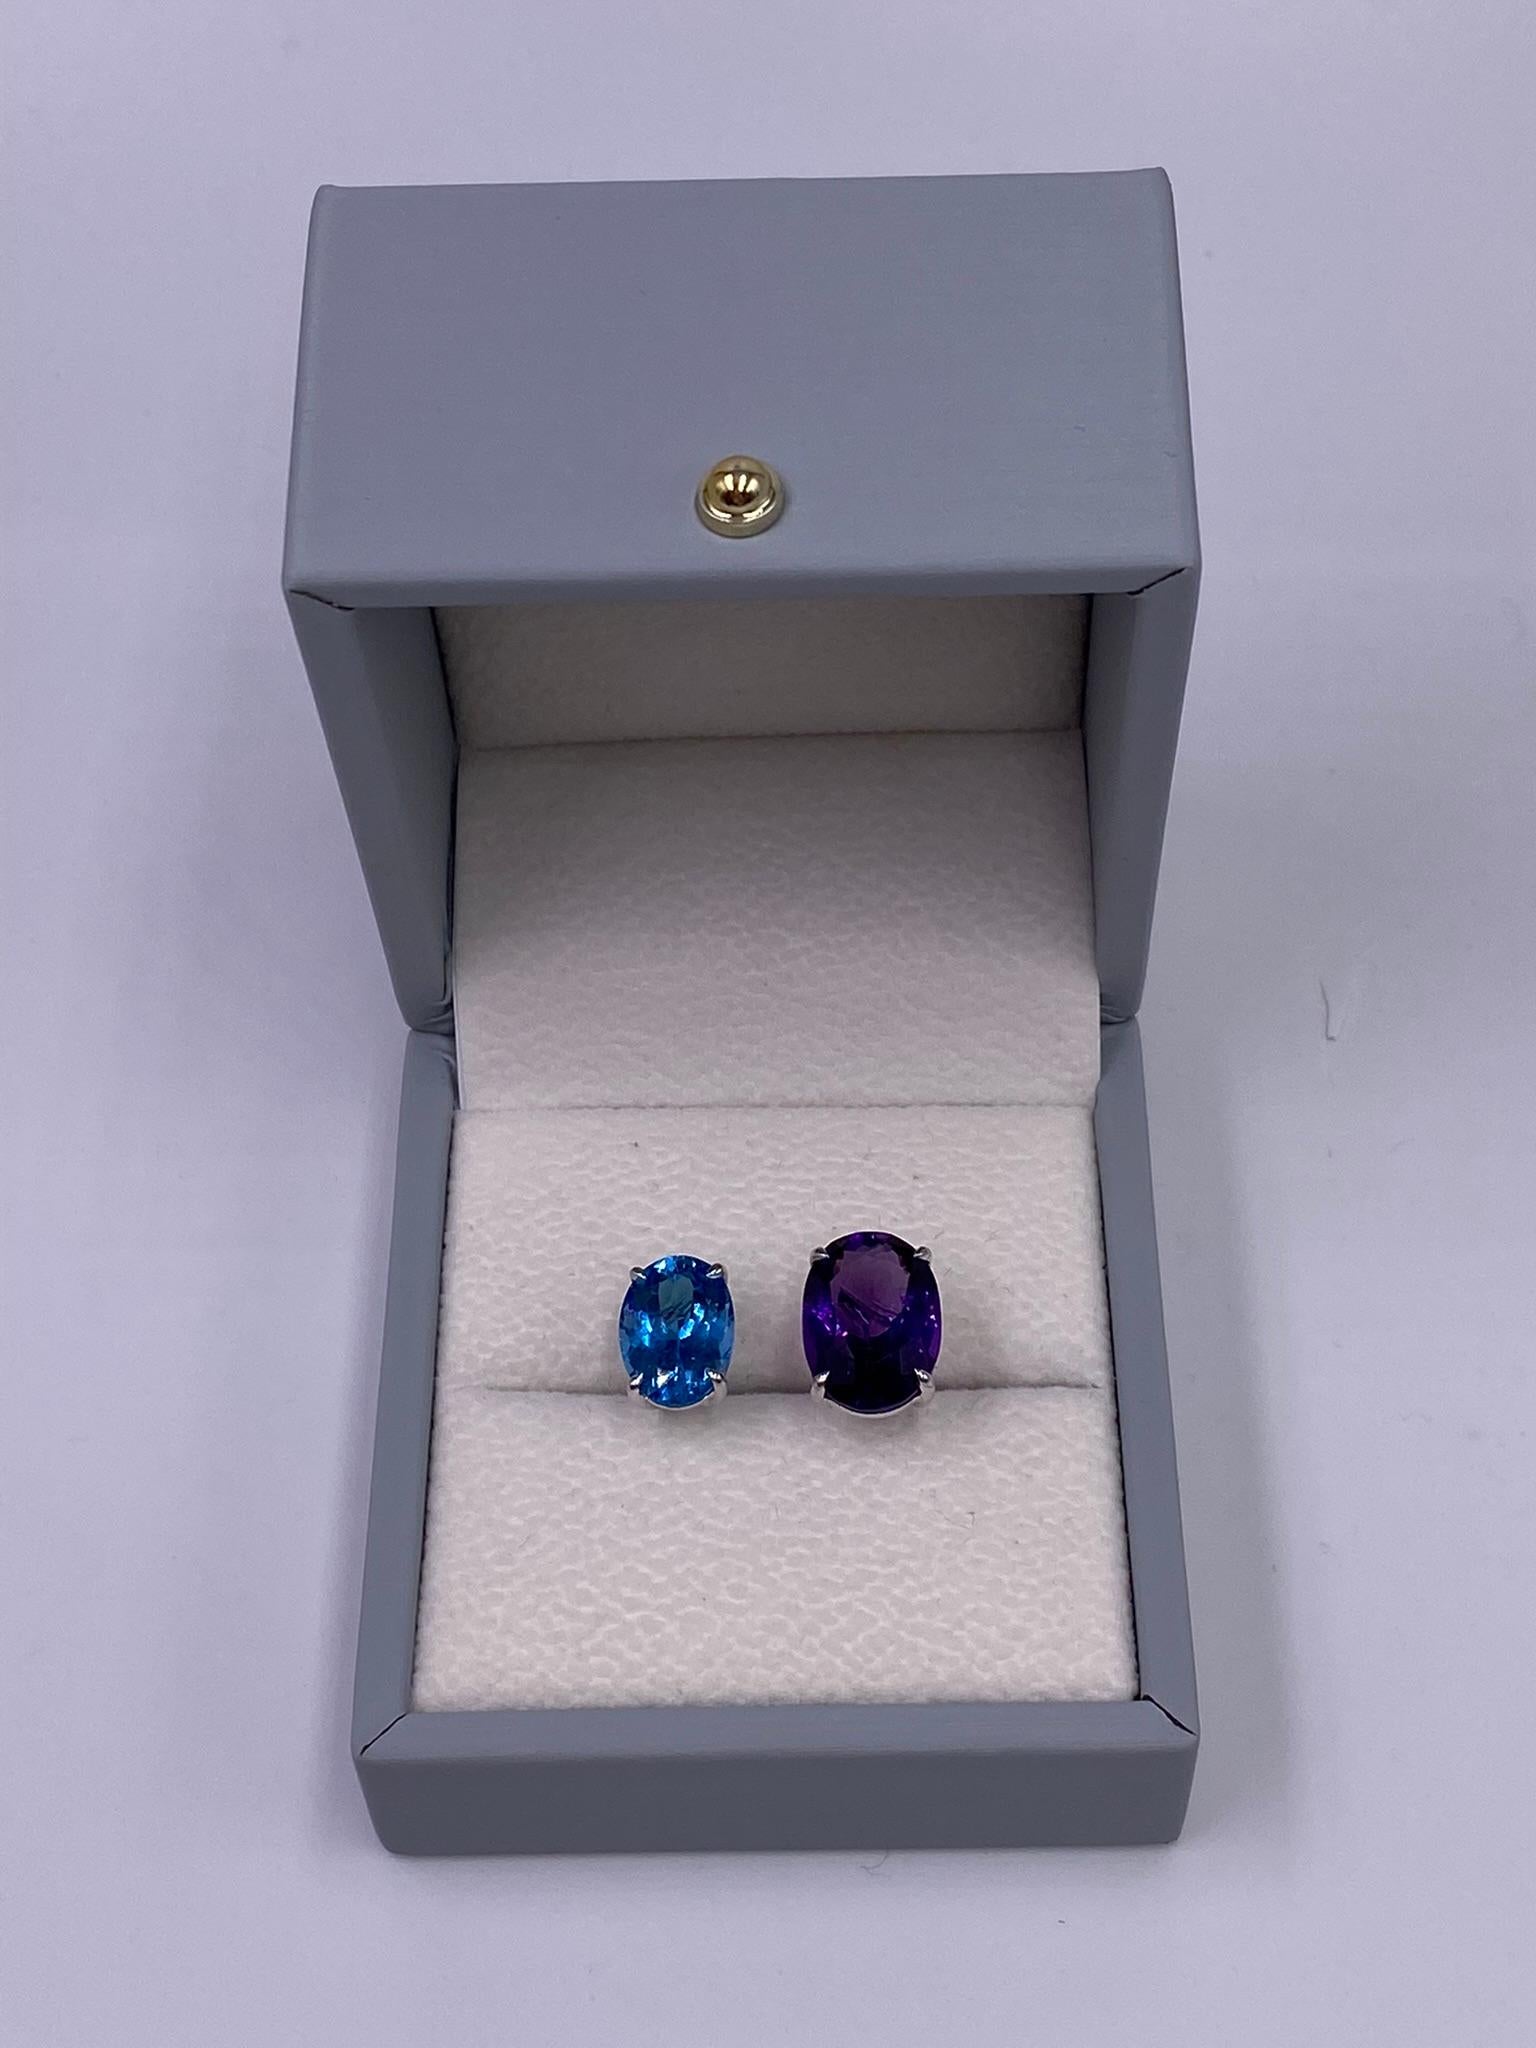 This stunning 18 K white gold ring features two gorgeous oval shaped gems: amethyst and blue topaz. This special ALPENGEM design beautifully demonstrates the gemstones on the unclosing ring construction, which makes it lighter and adds some space to